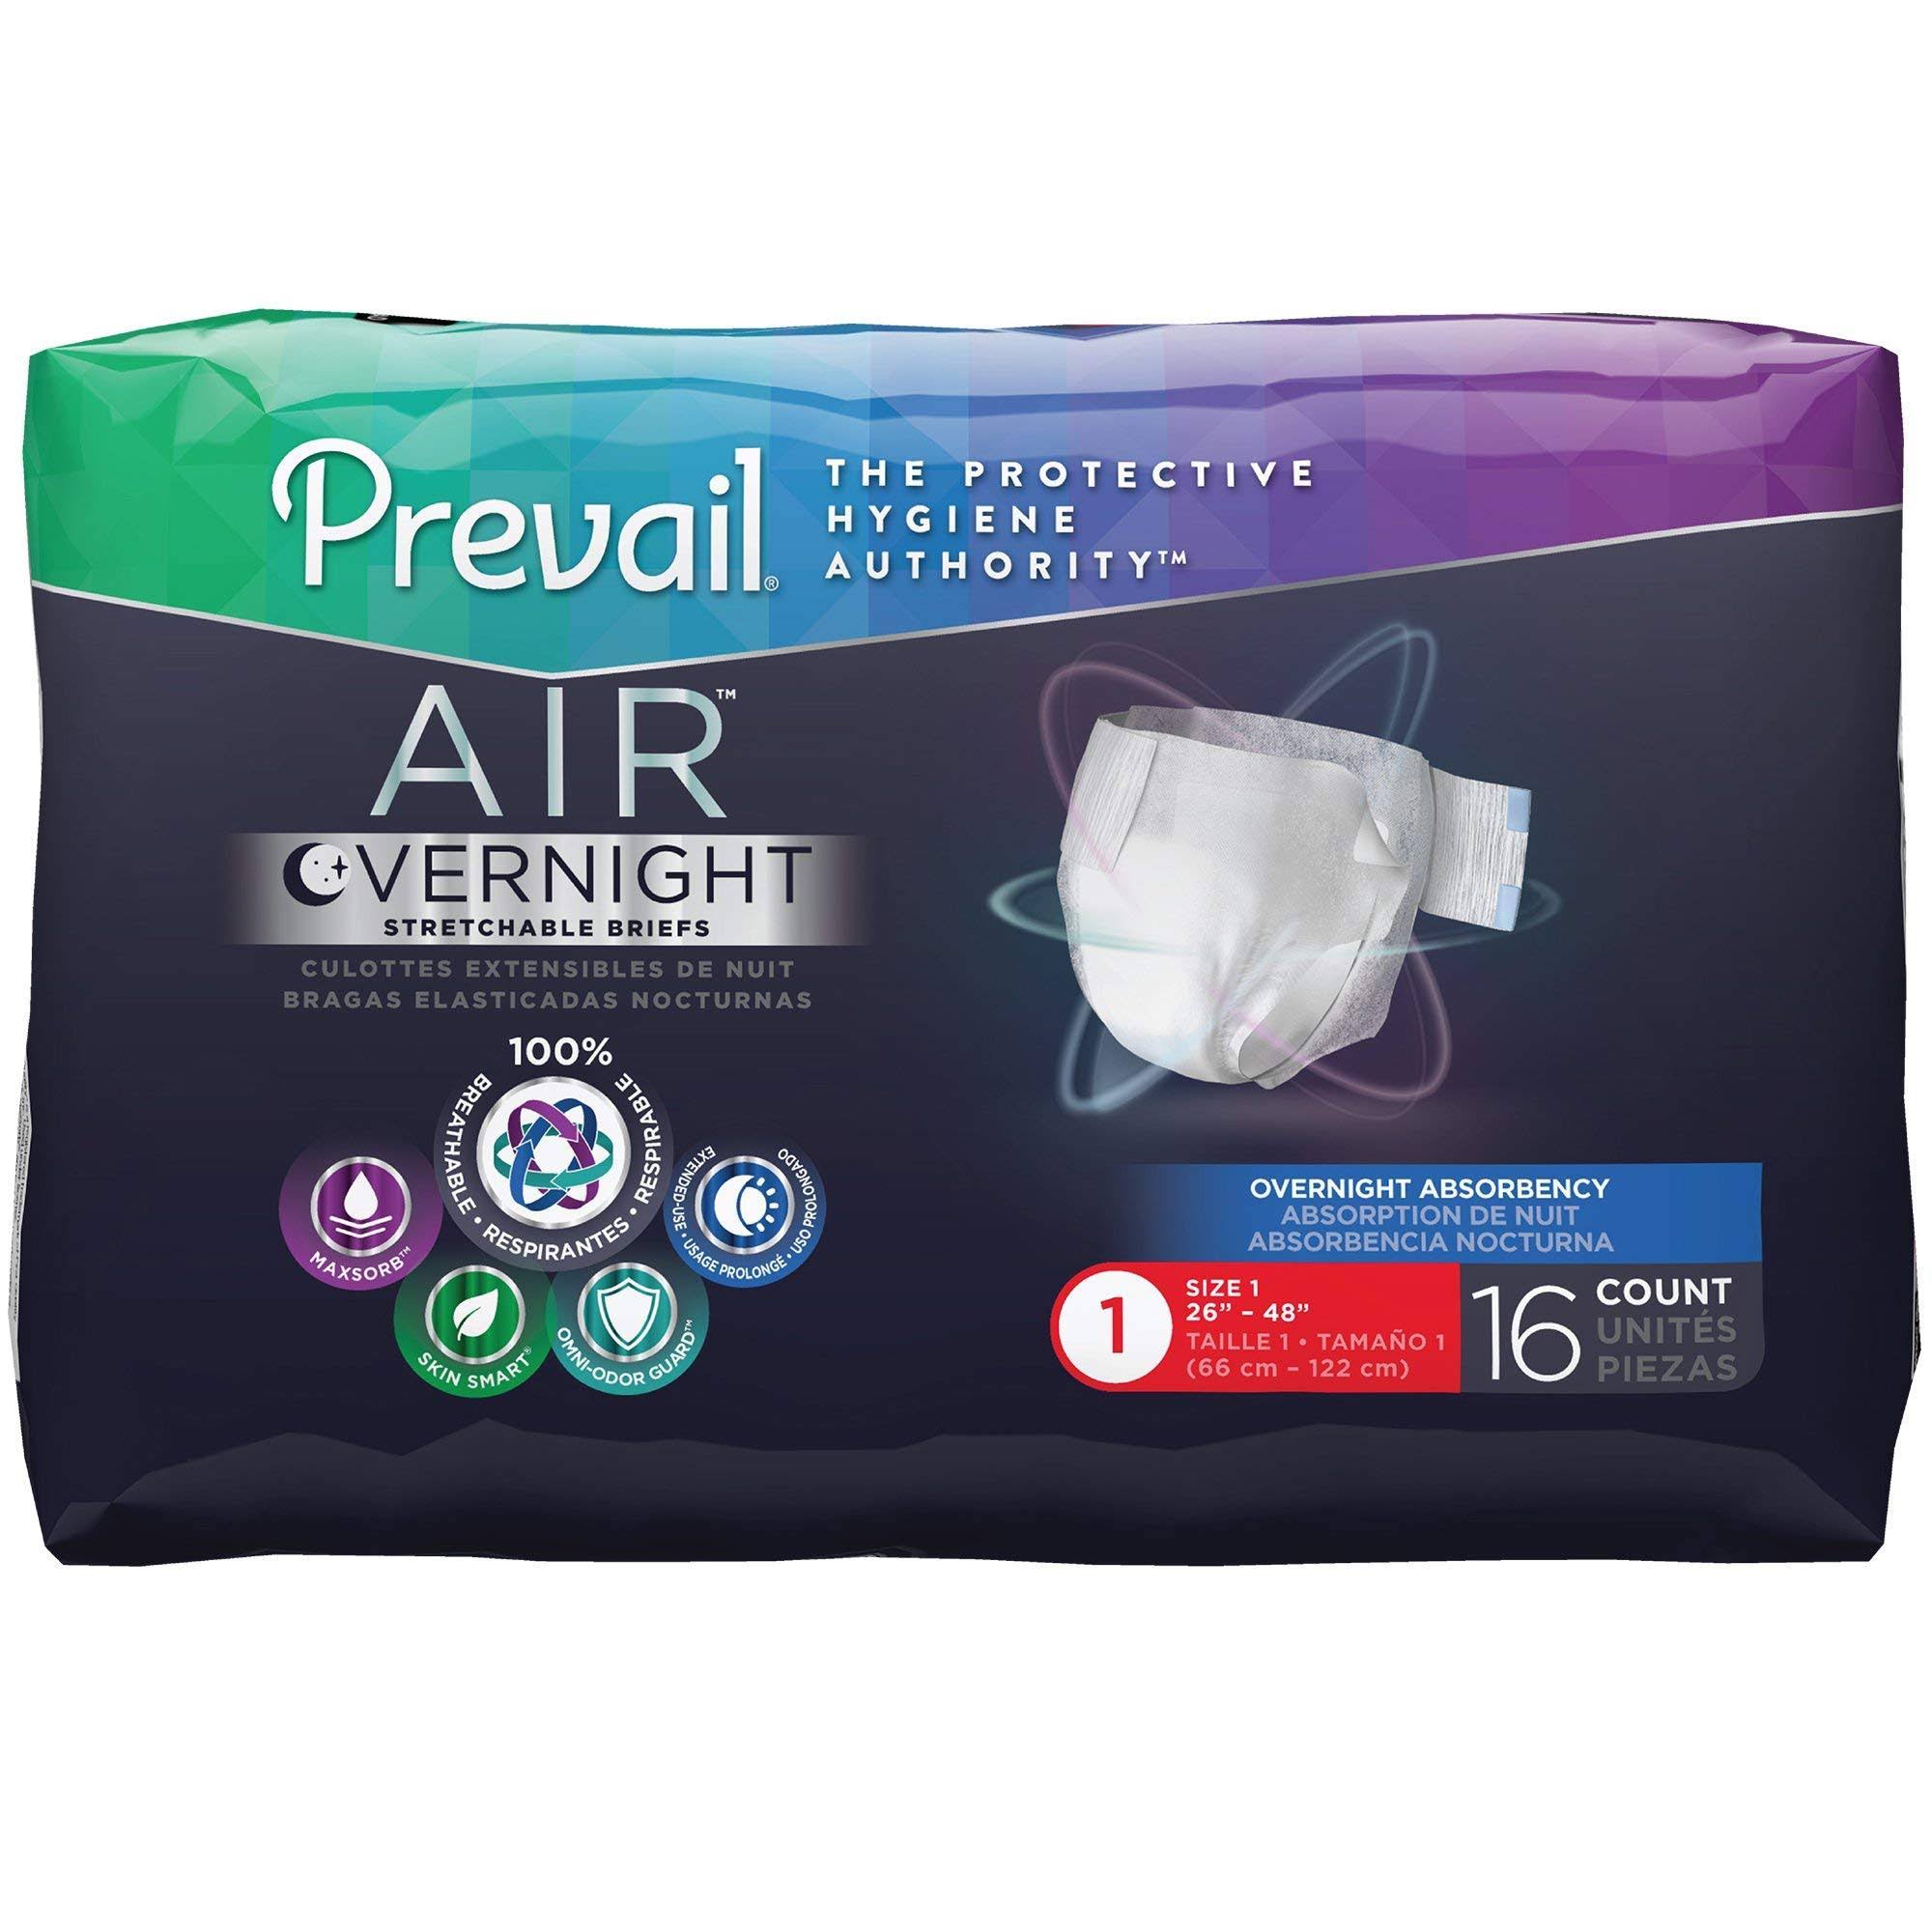 Prevail Air Overnight Incontinence Brief - Size 1 - Bag of 16